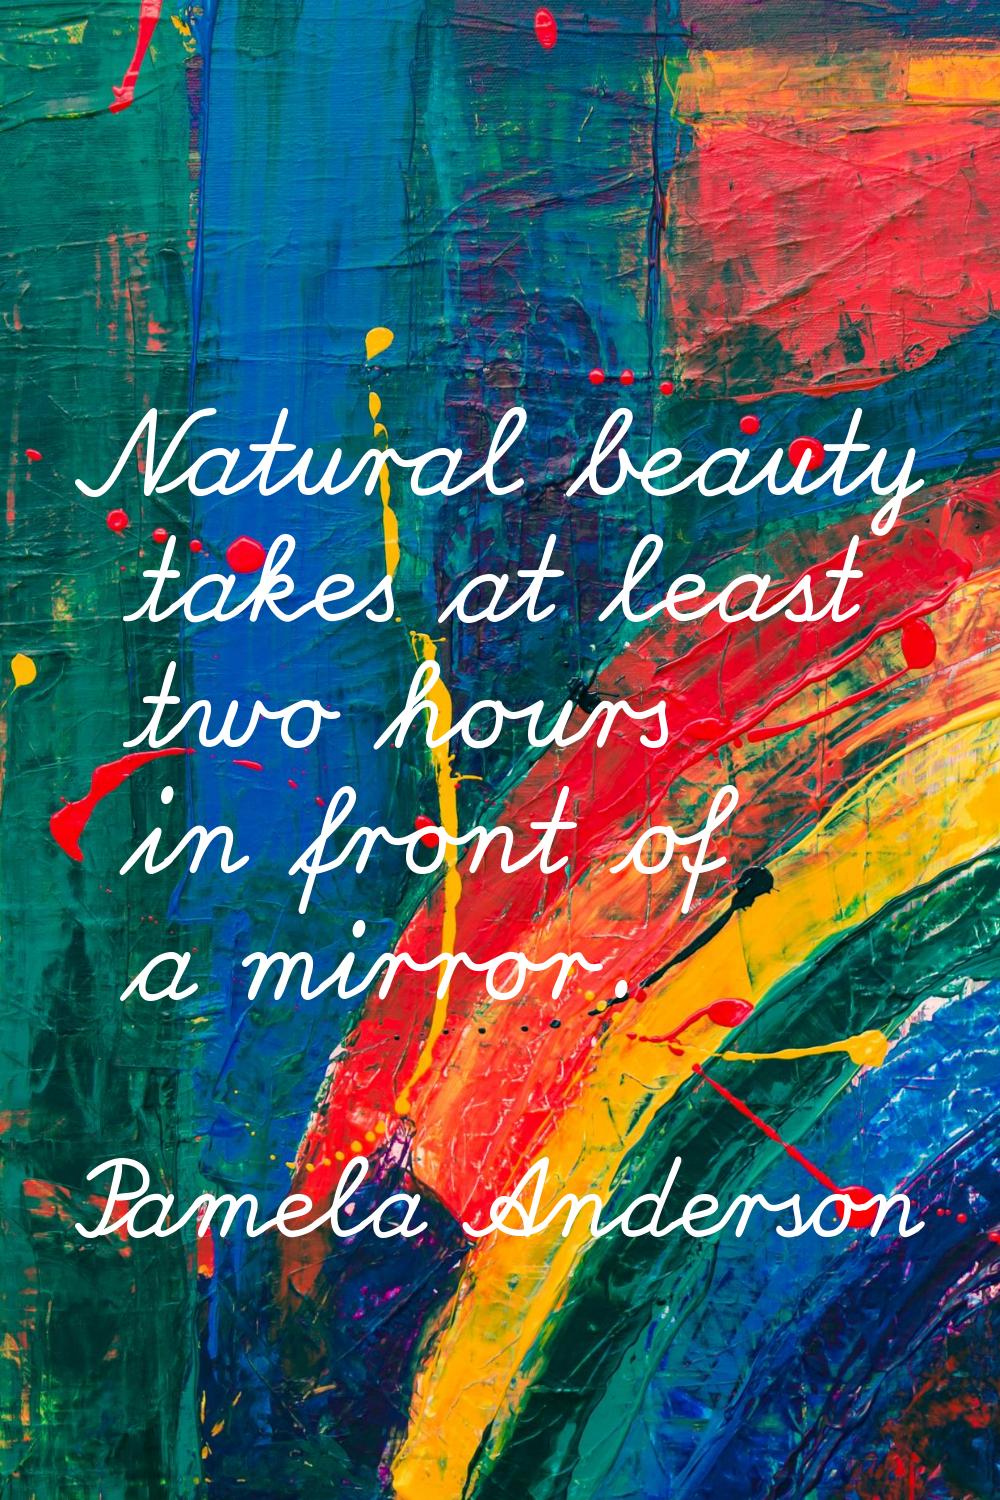 Natural beauty takes at least two hours in front of a mirror.